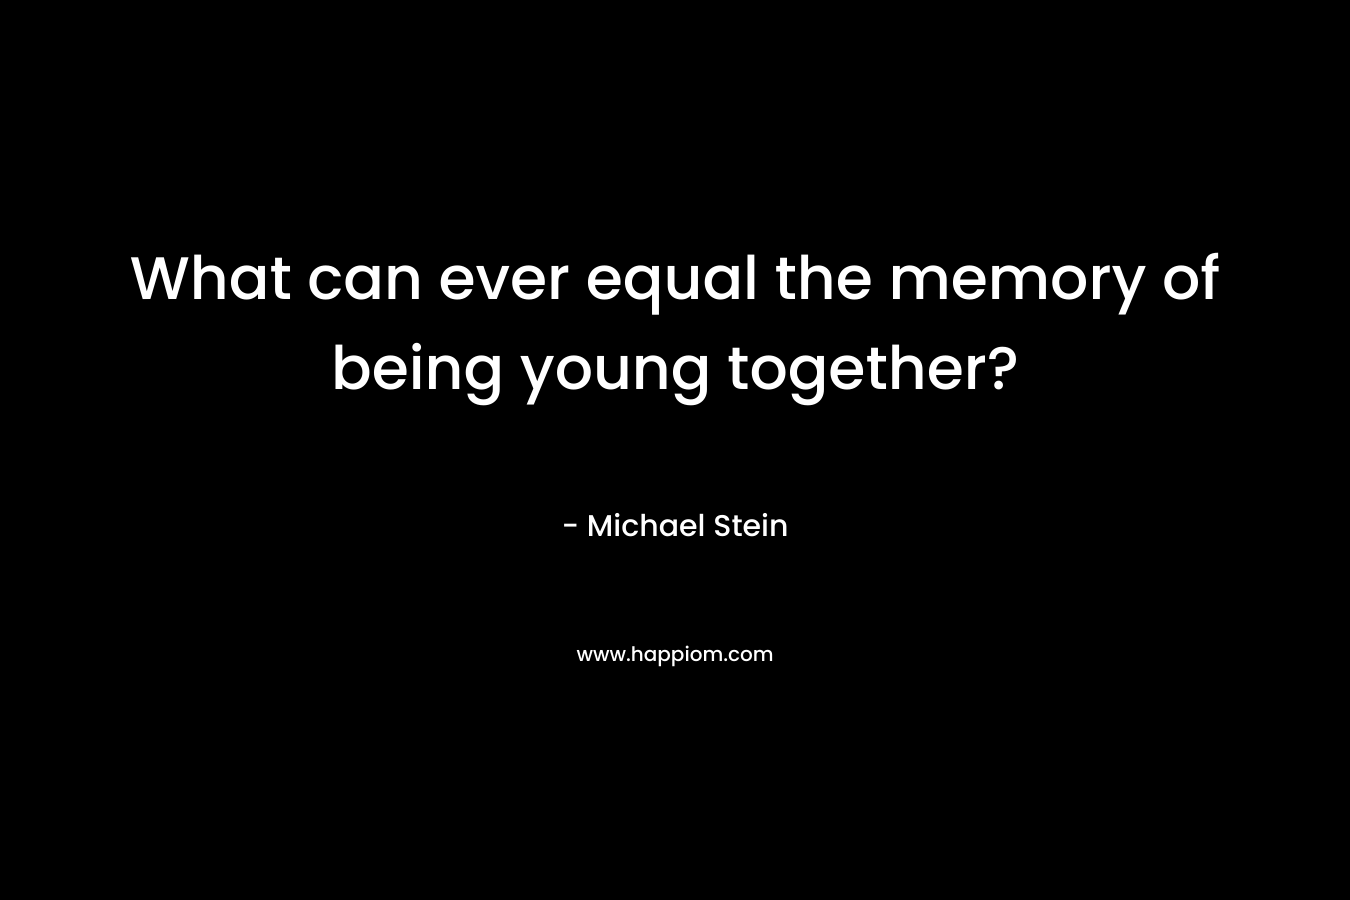 What can ever equal the memory of being young together? – Michael Stein